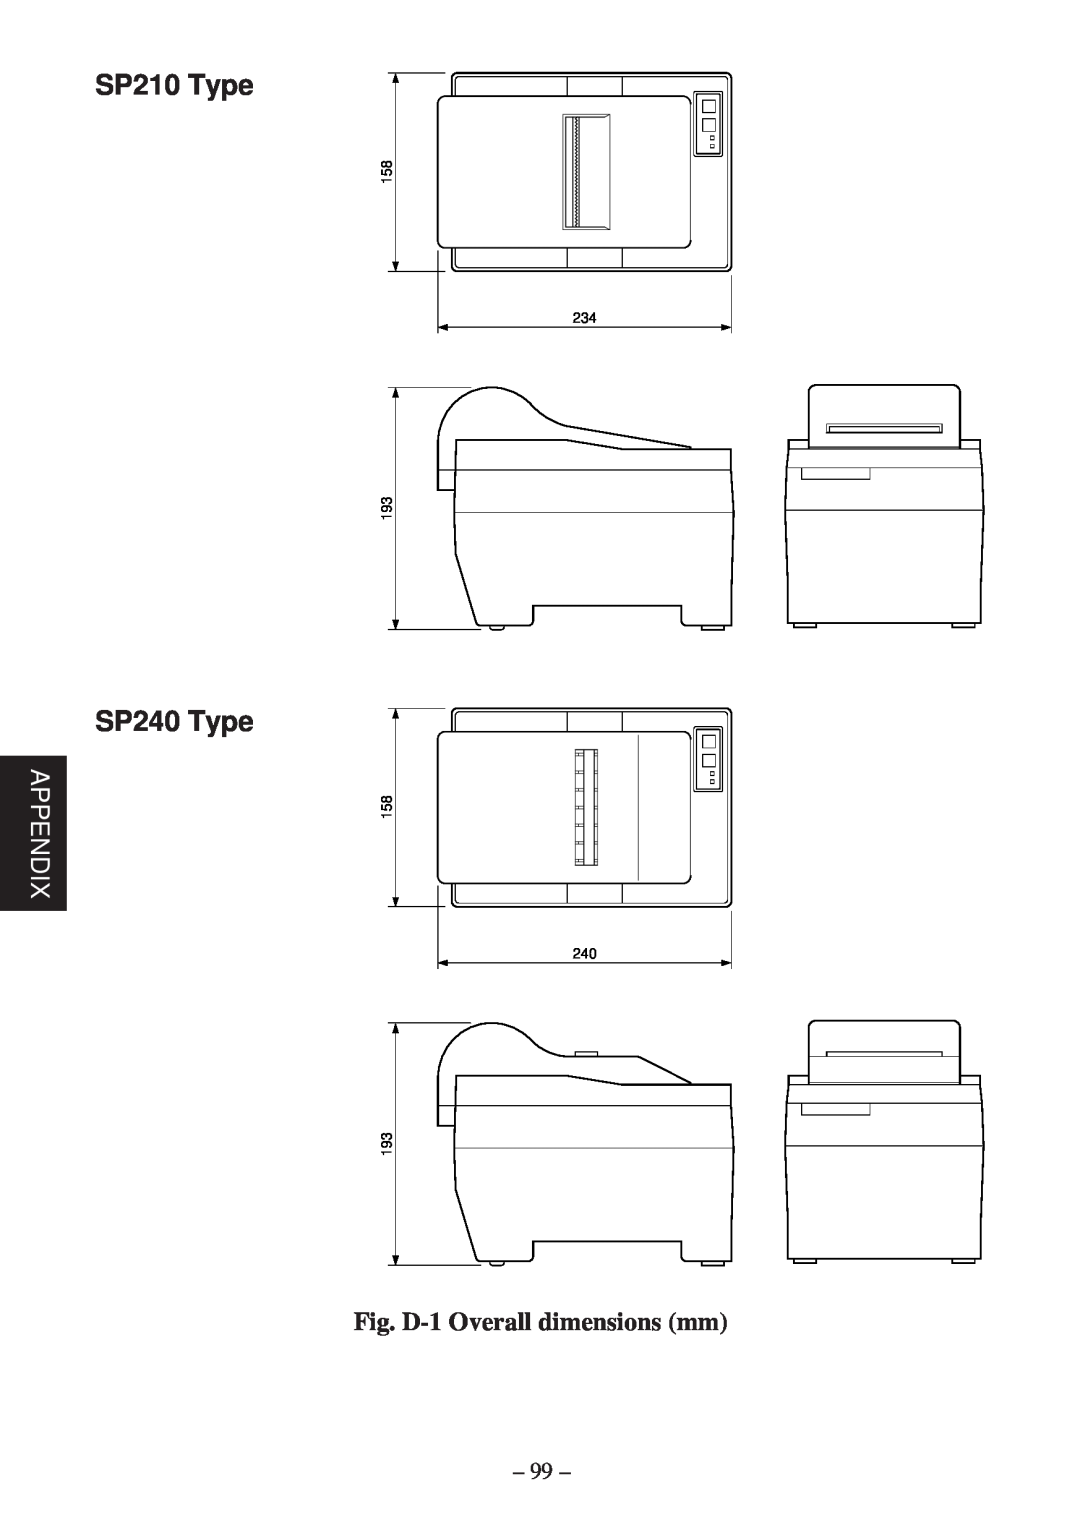 Star Micronics SP200F SP210 Type, SP240 Type, Appendix, Fig. D-1 Overall dimensions mm, 158 234 193, 158 240 193 